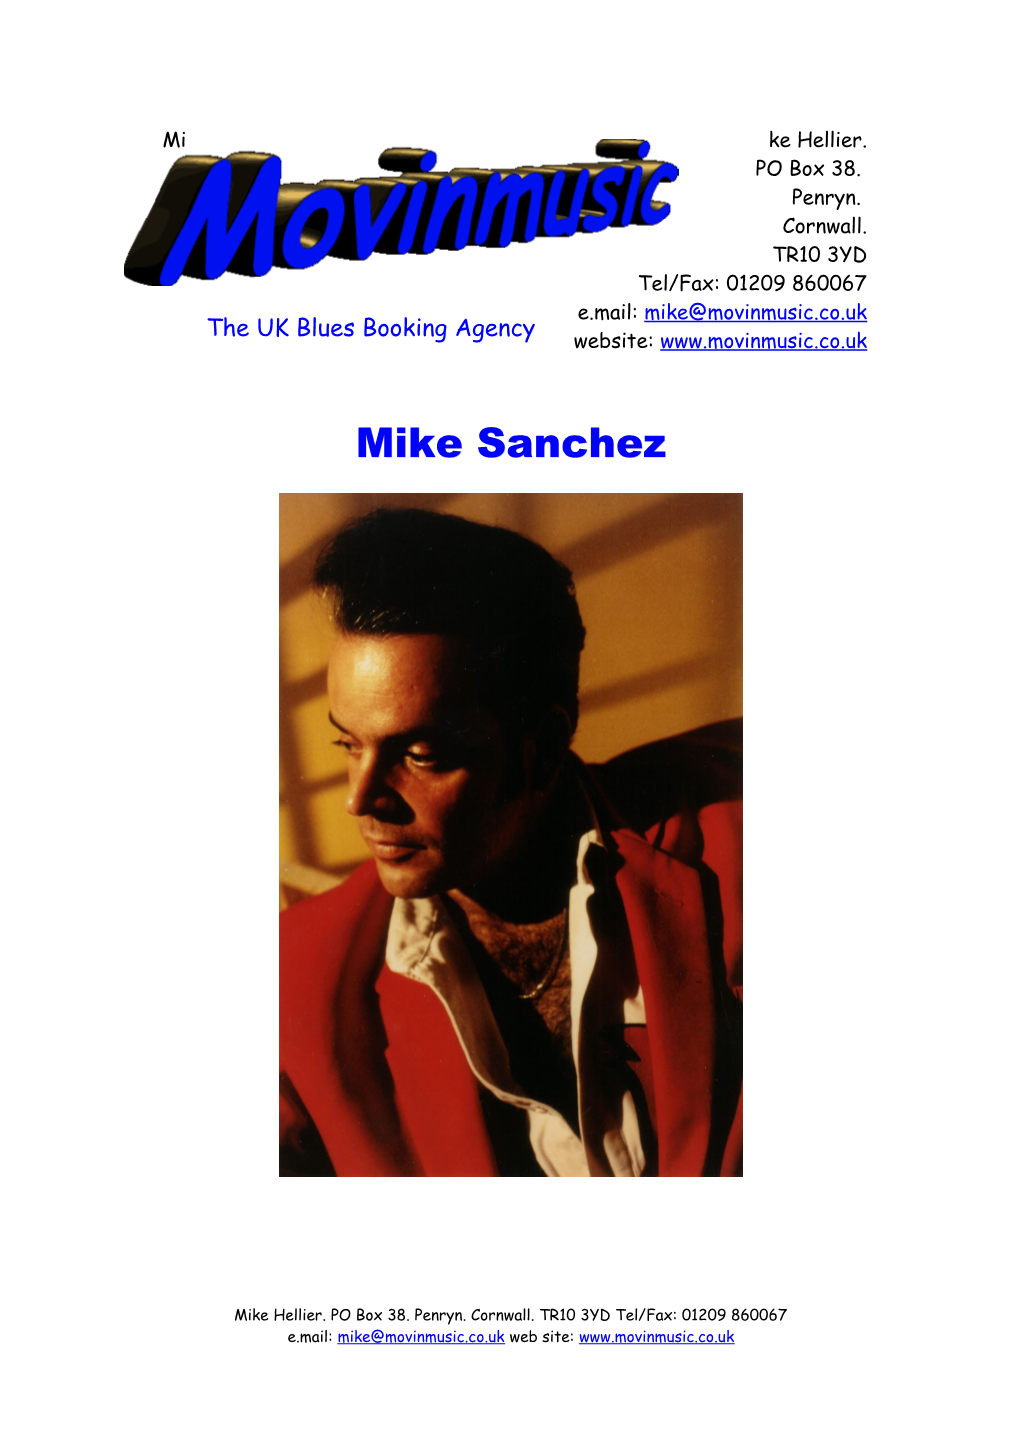 British Singer, Pianist and Guitarist Mike Sanchez Is One of the Most Exciting and Charismatic